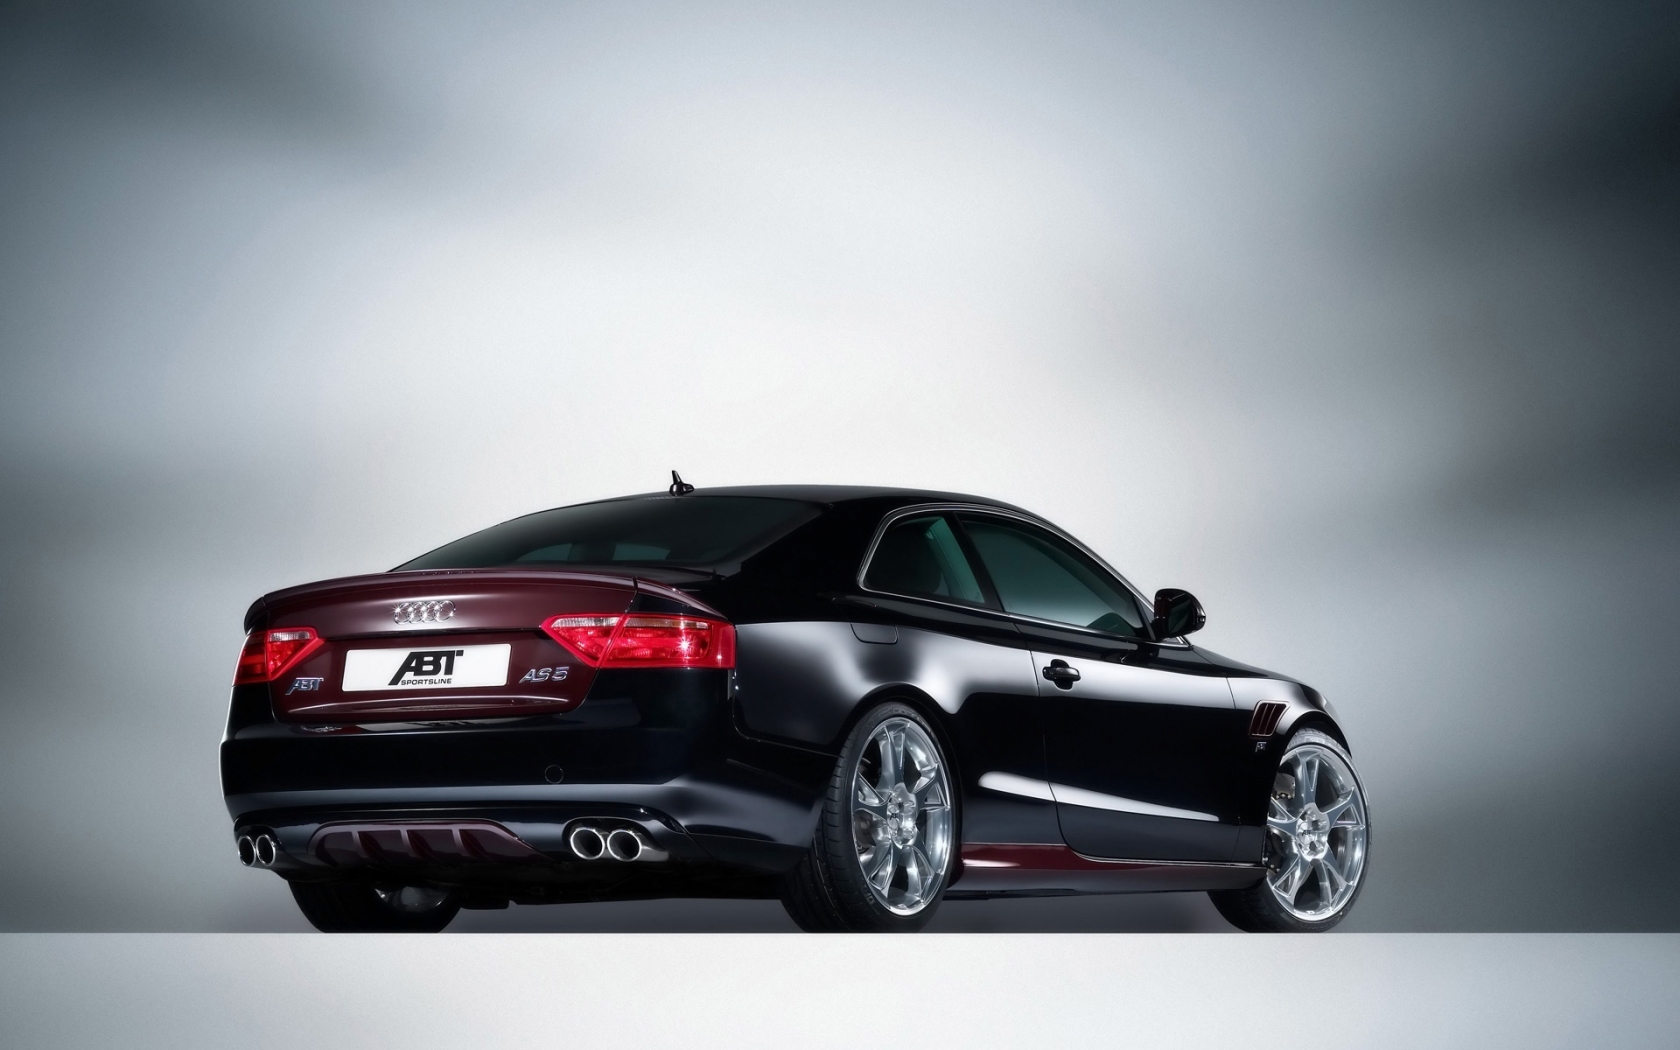 2008 Abt Audi AS5 - Rear Angle for 1680 x 1050 widescreen resolution